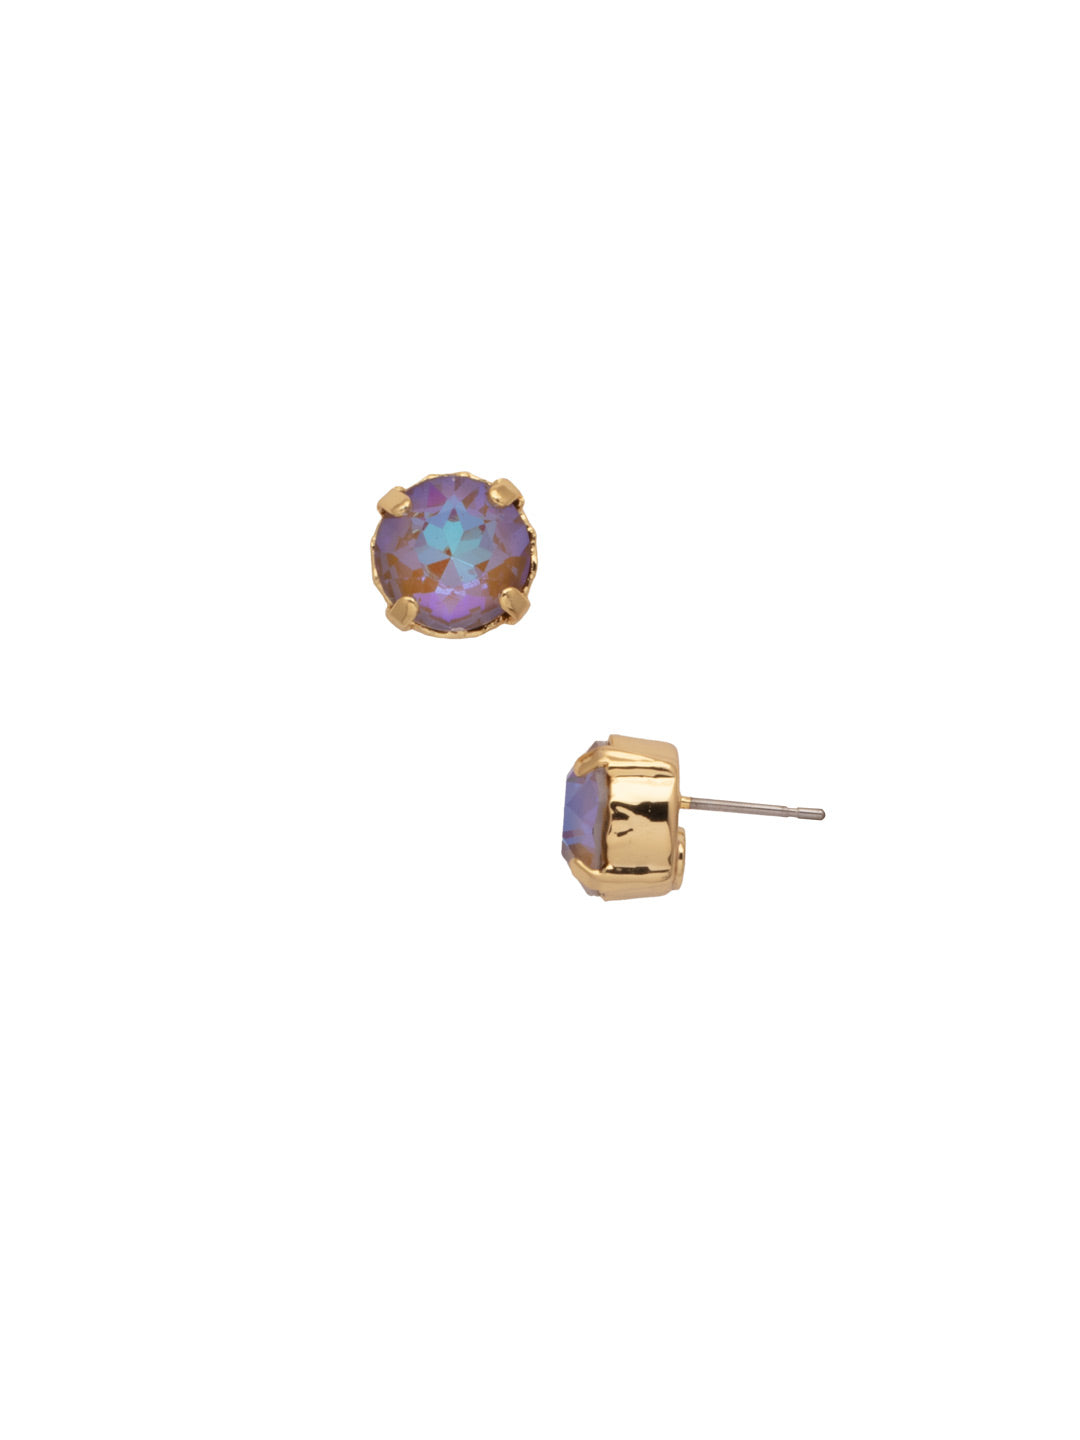 London Stud Earrings - ECM14BGRSU - <p>Everyone needs a great pair of studs. Add some classic sparkle to any occasion with these stud earrings. Need help picking a stud? <a href="https://www.sorrelli.com/blogs/sisterhood/round-stud-earrings-101-a-rundown-of-sizes-styles-and-sparkle">Check out our size guide!</a> From Sorrelli's Raw Sugar collection in our Bright Gold-tone finish.</p>